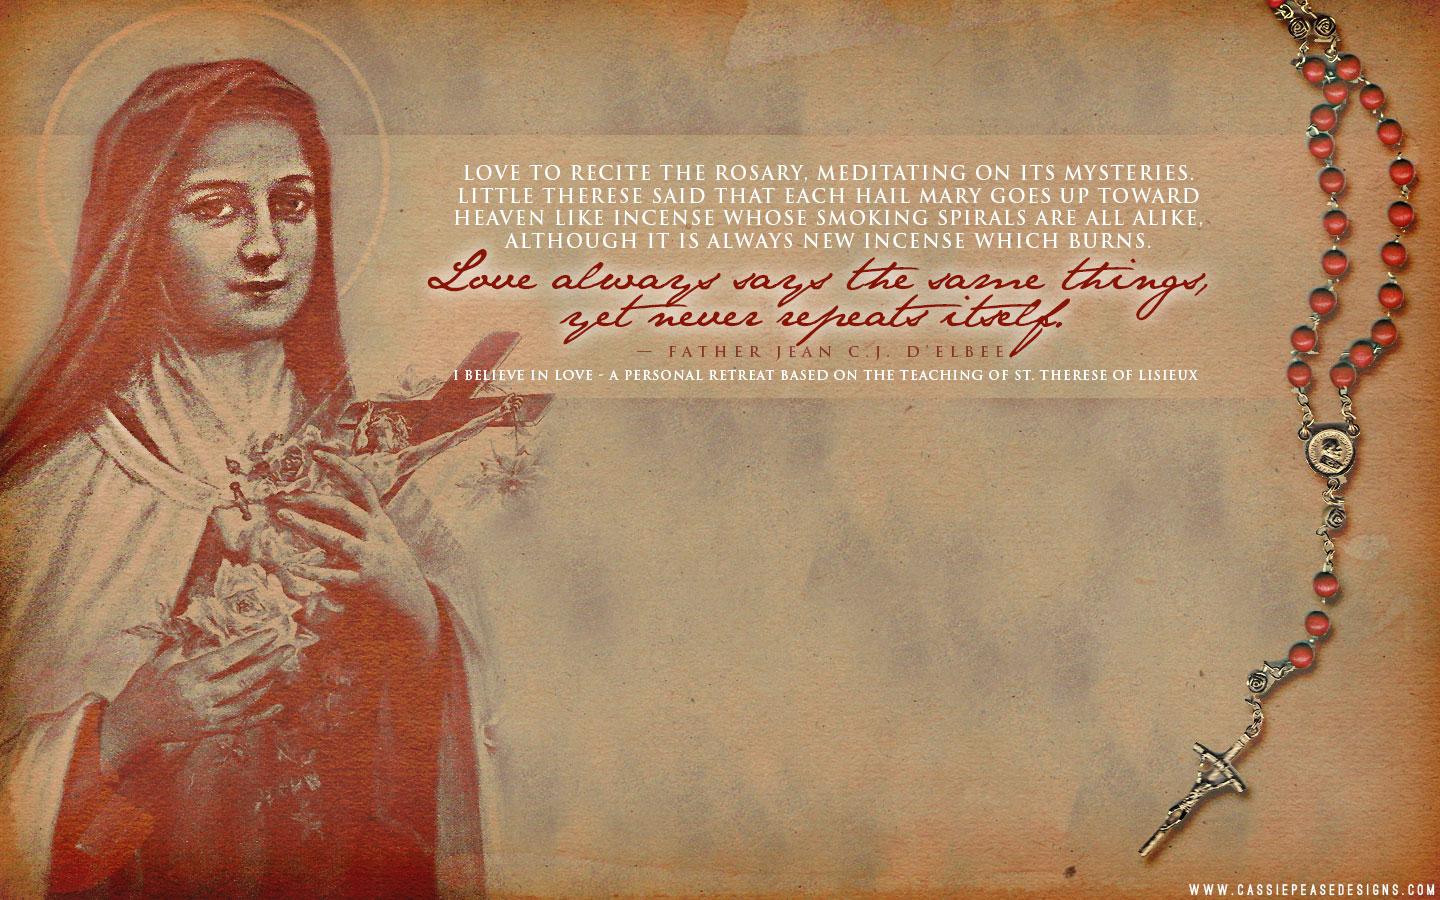 St. Therese “Rosary” Desktop Wallpaper. Cassie Pease Designs